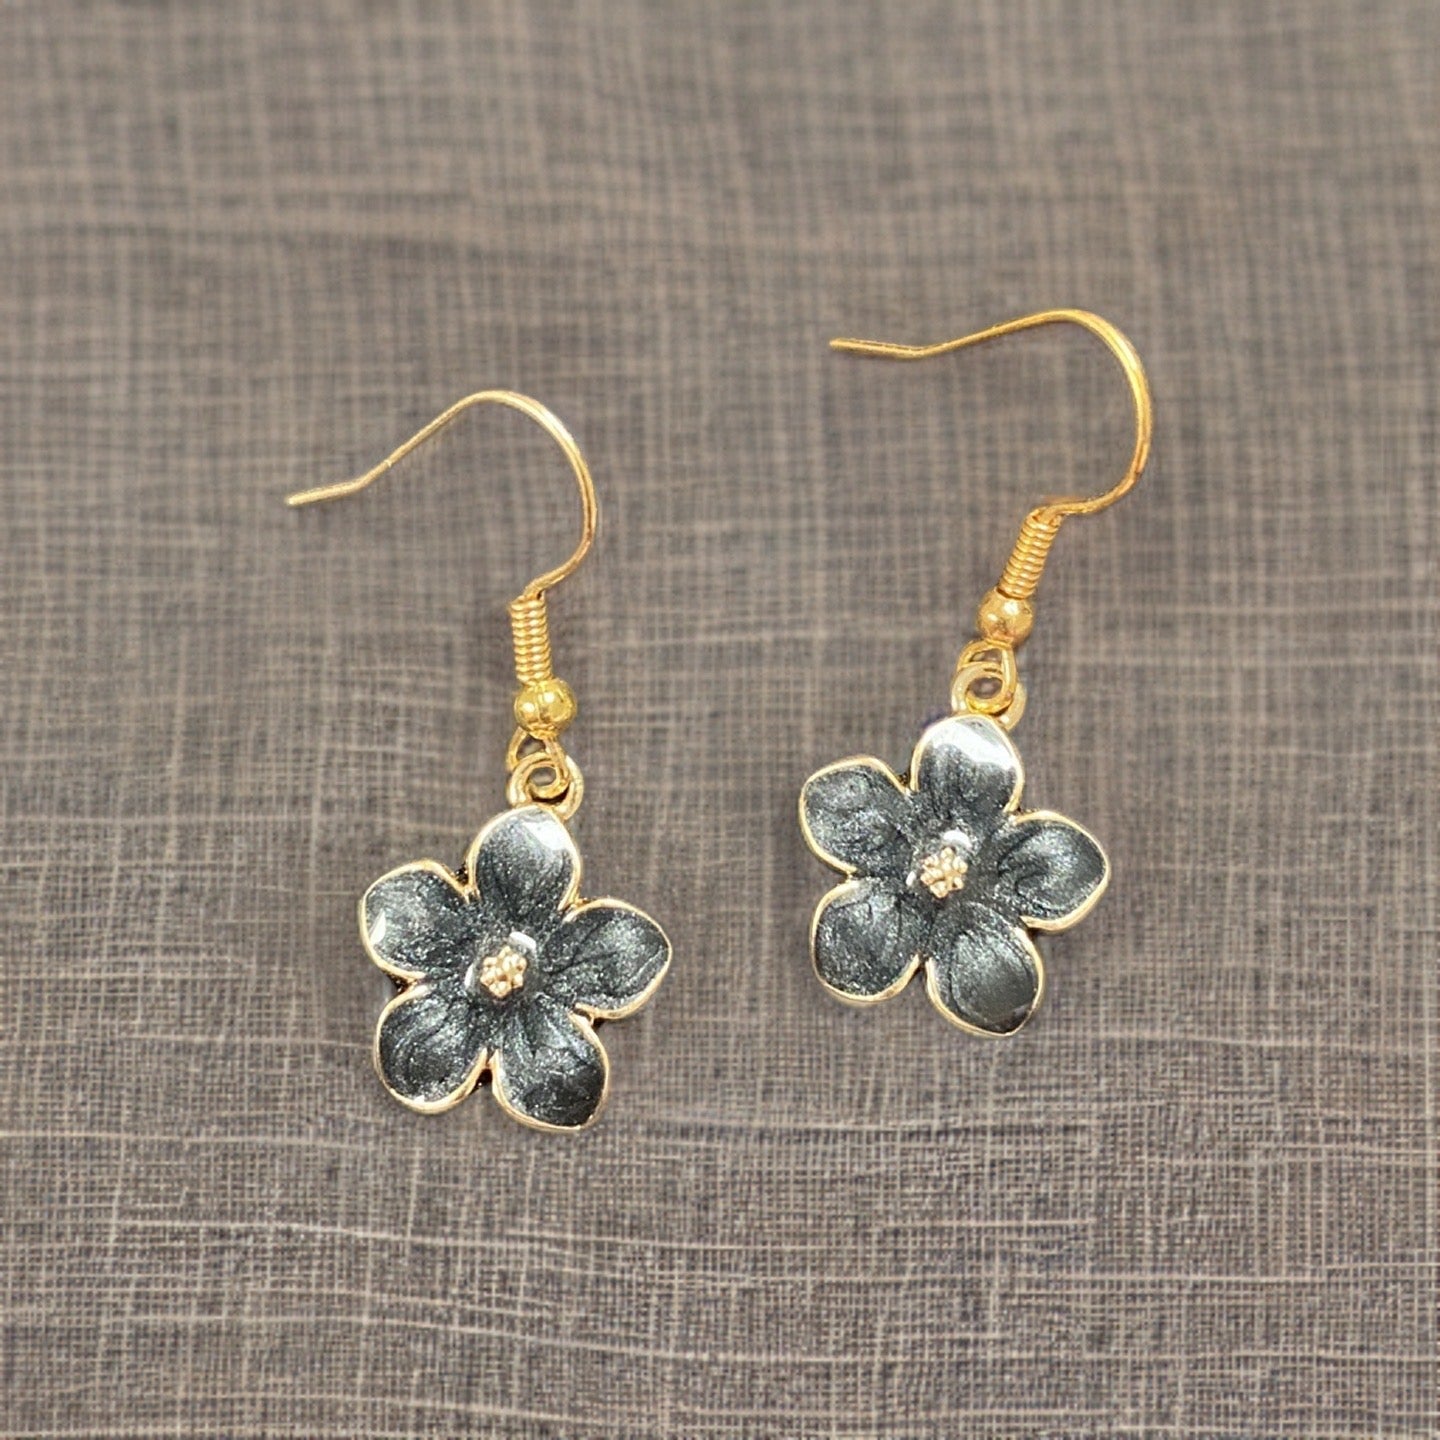 Handmade Earrings with Unique Hypoallergenic Charms - SBJ